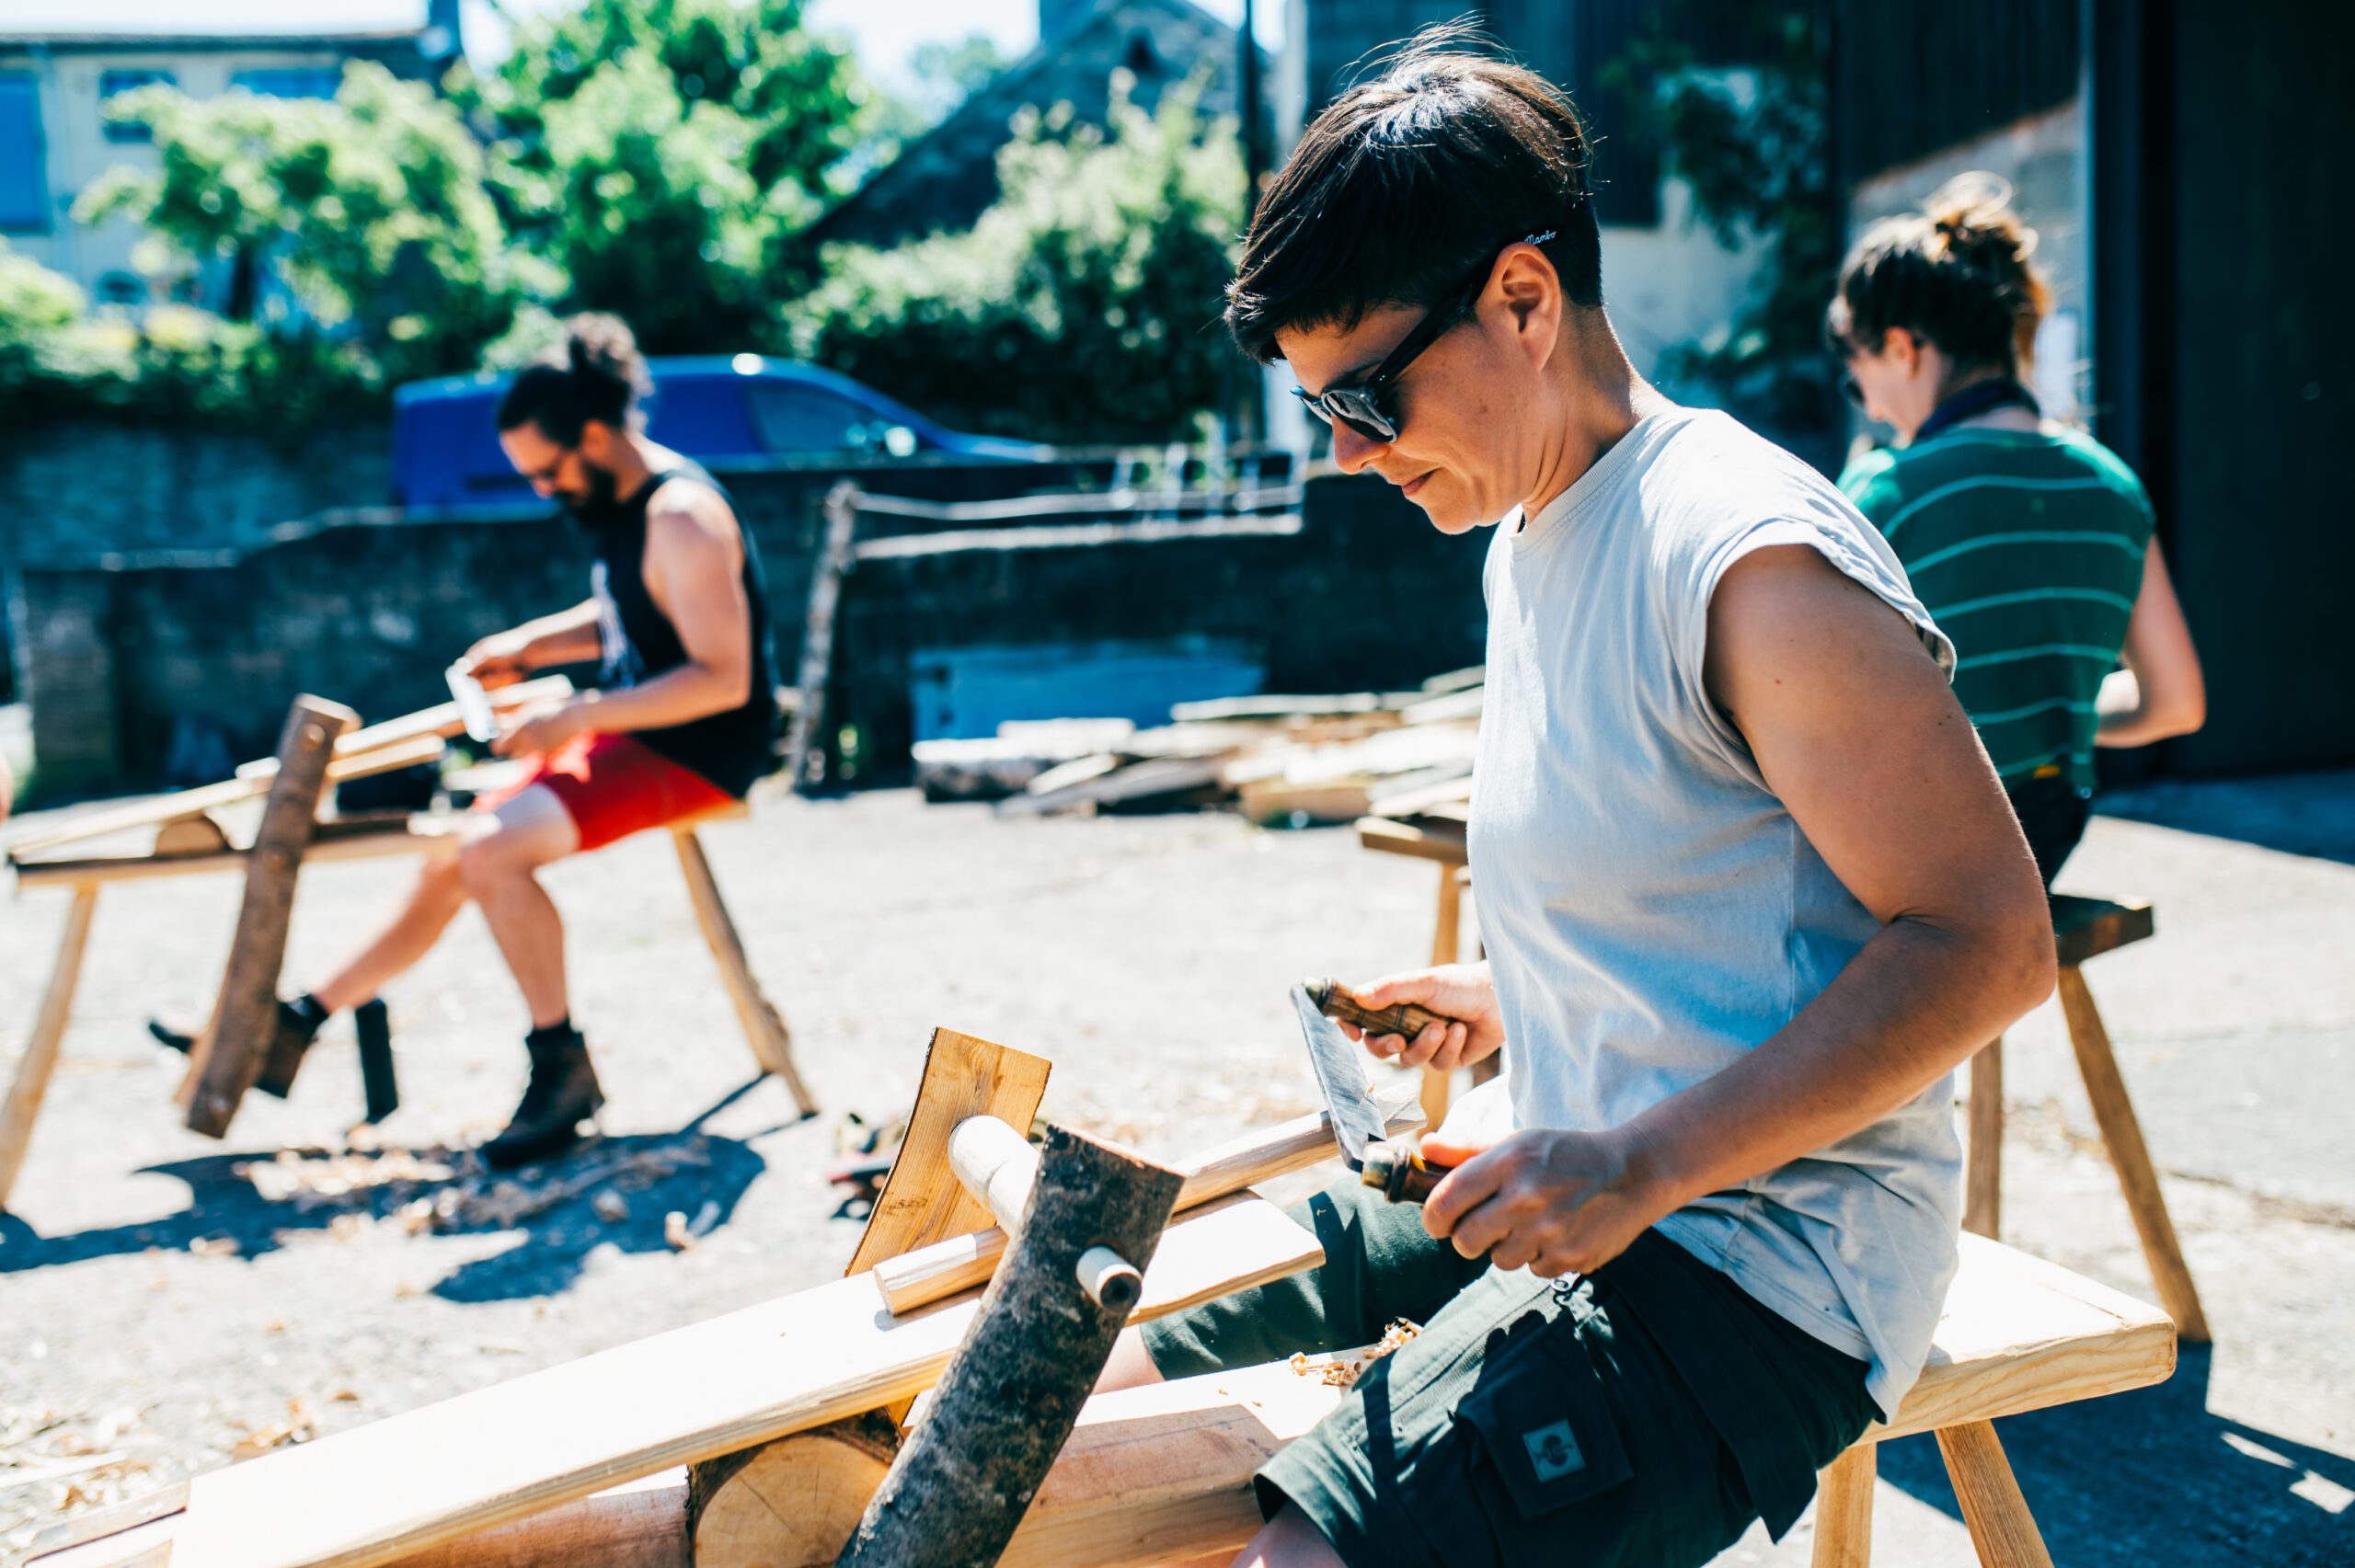 A person sitting and using a saw on wood